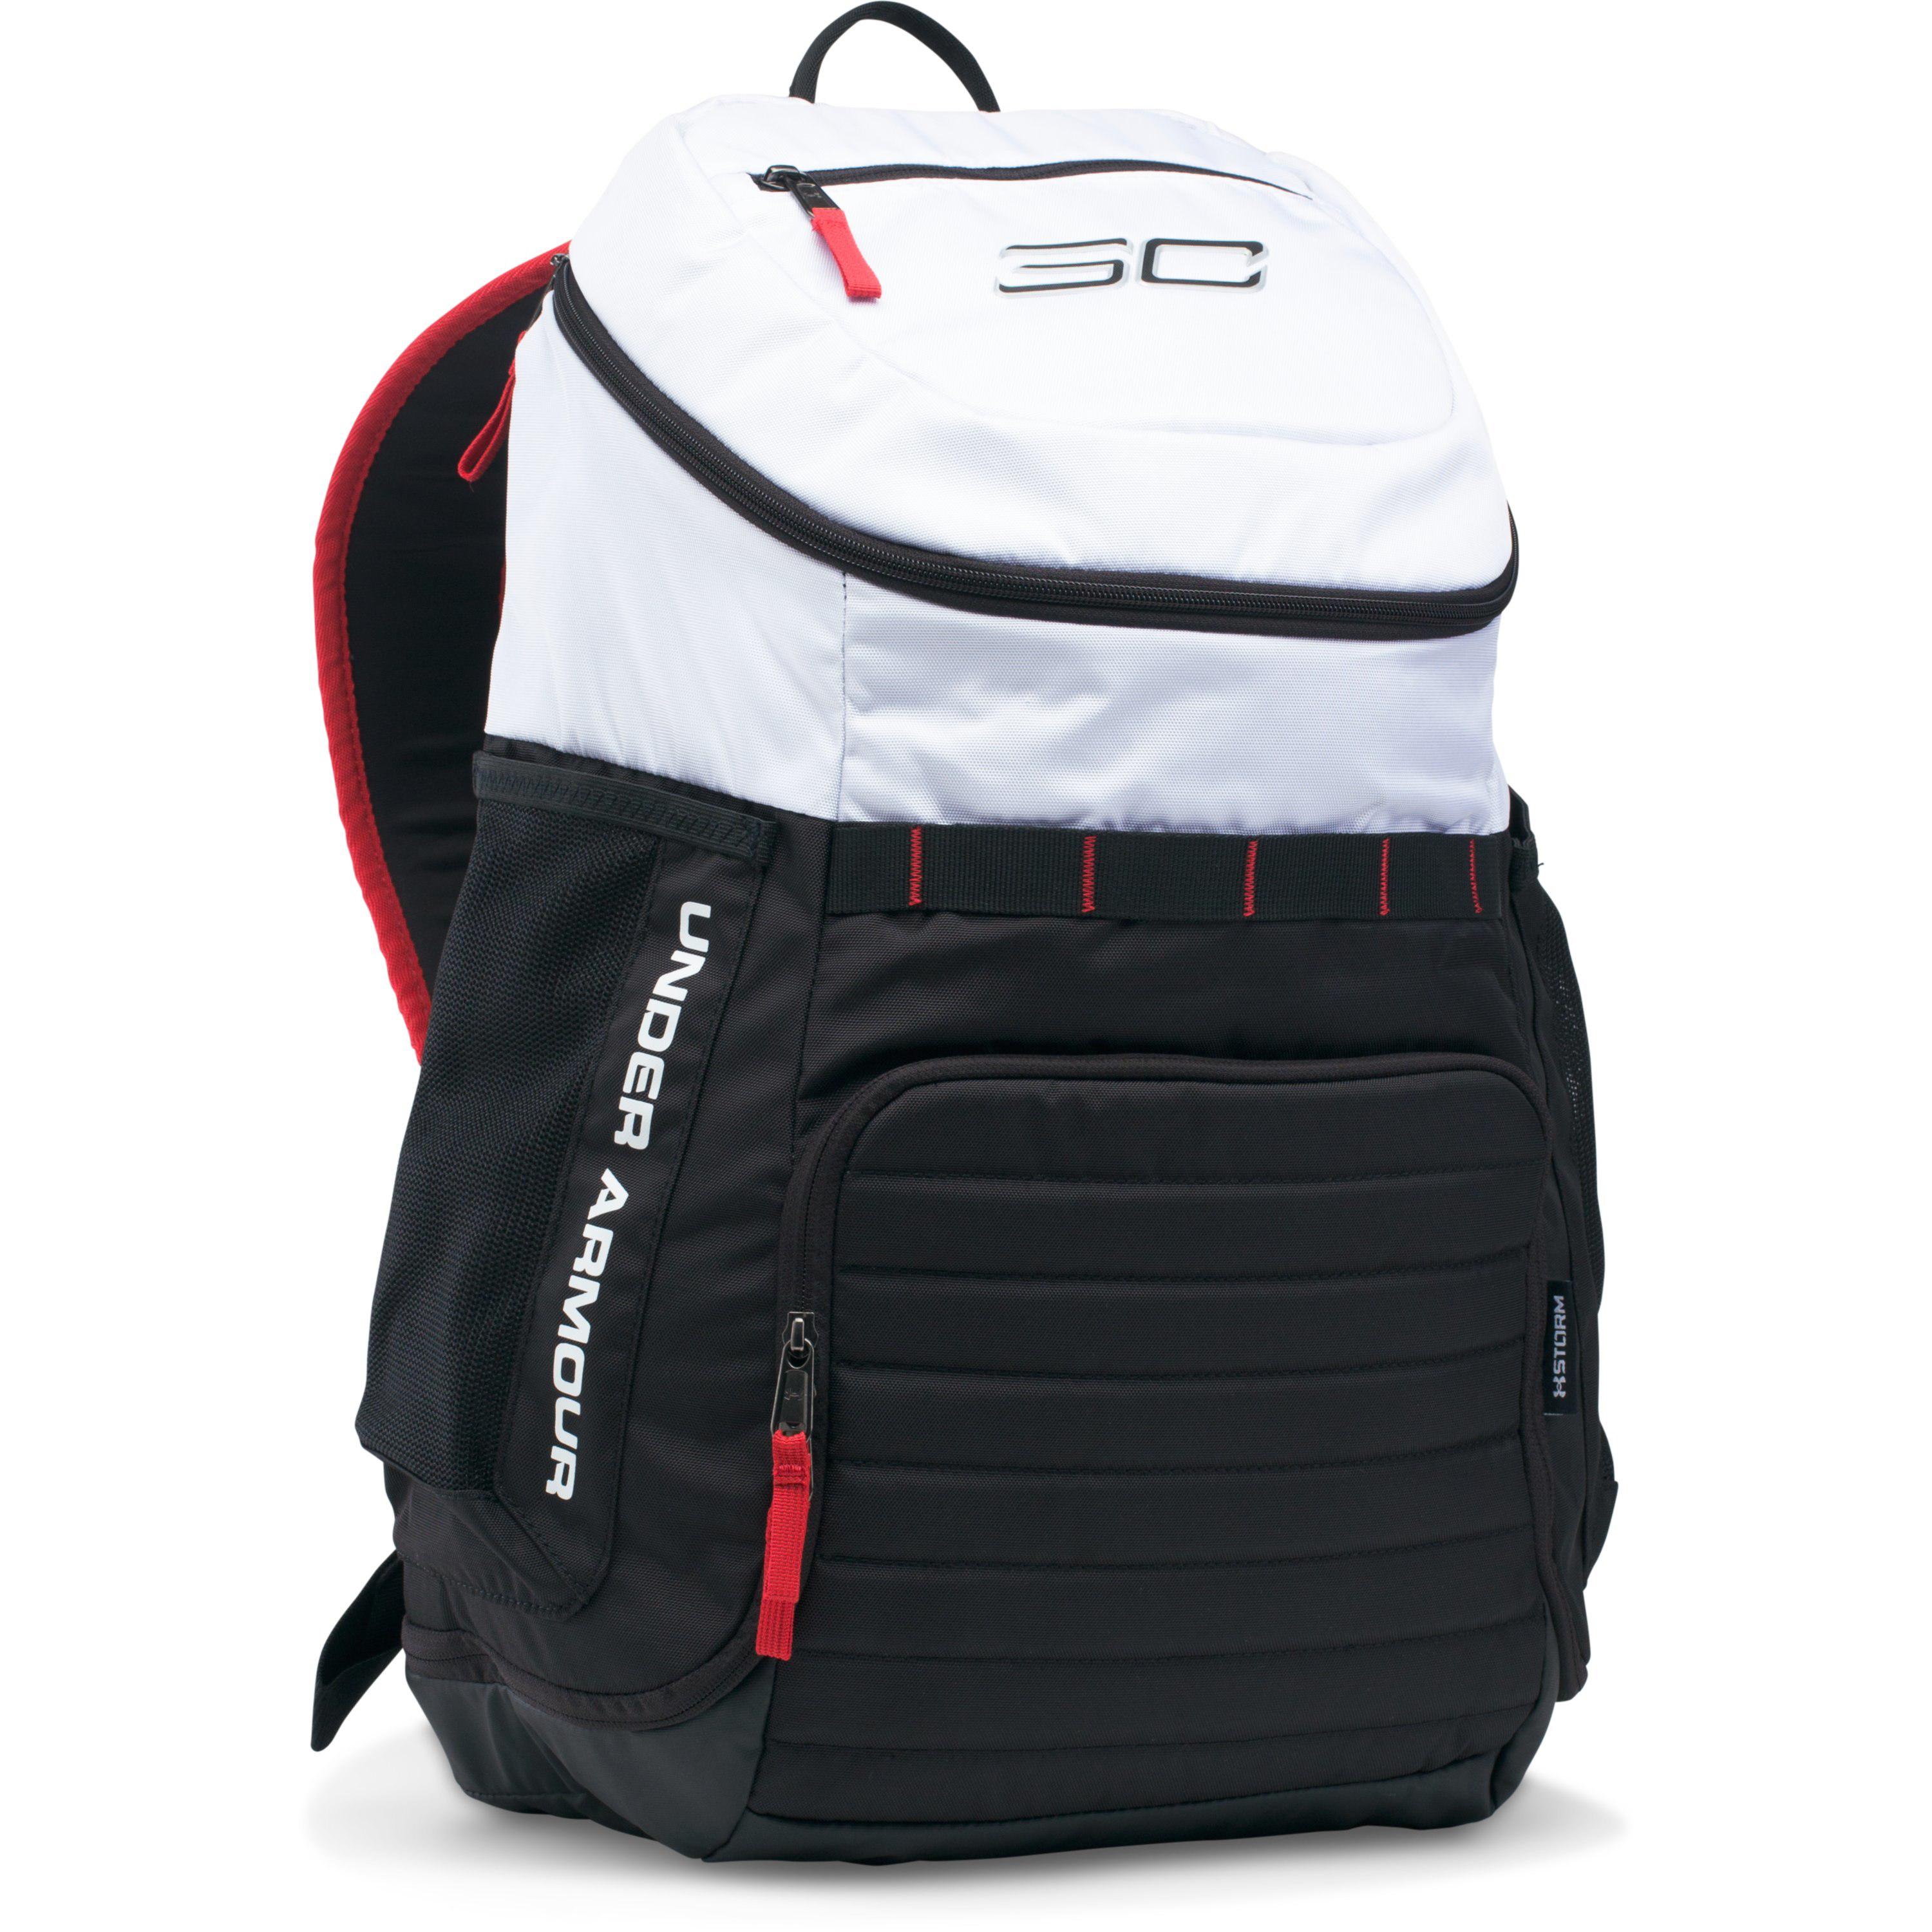 Under Armour SC30 Undeniable Backpack